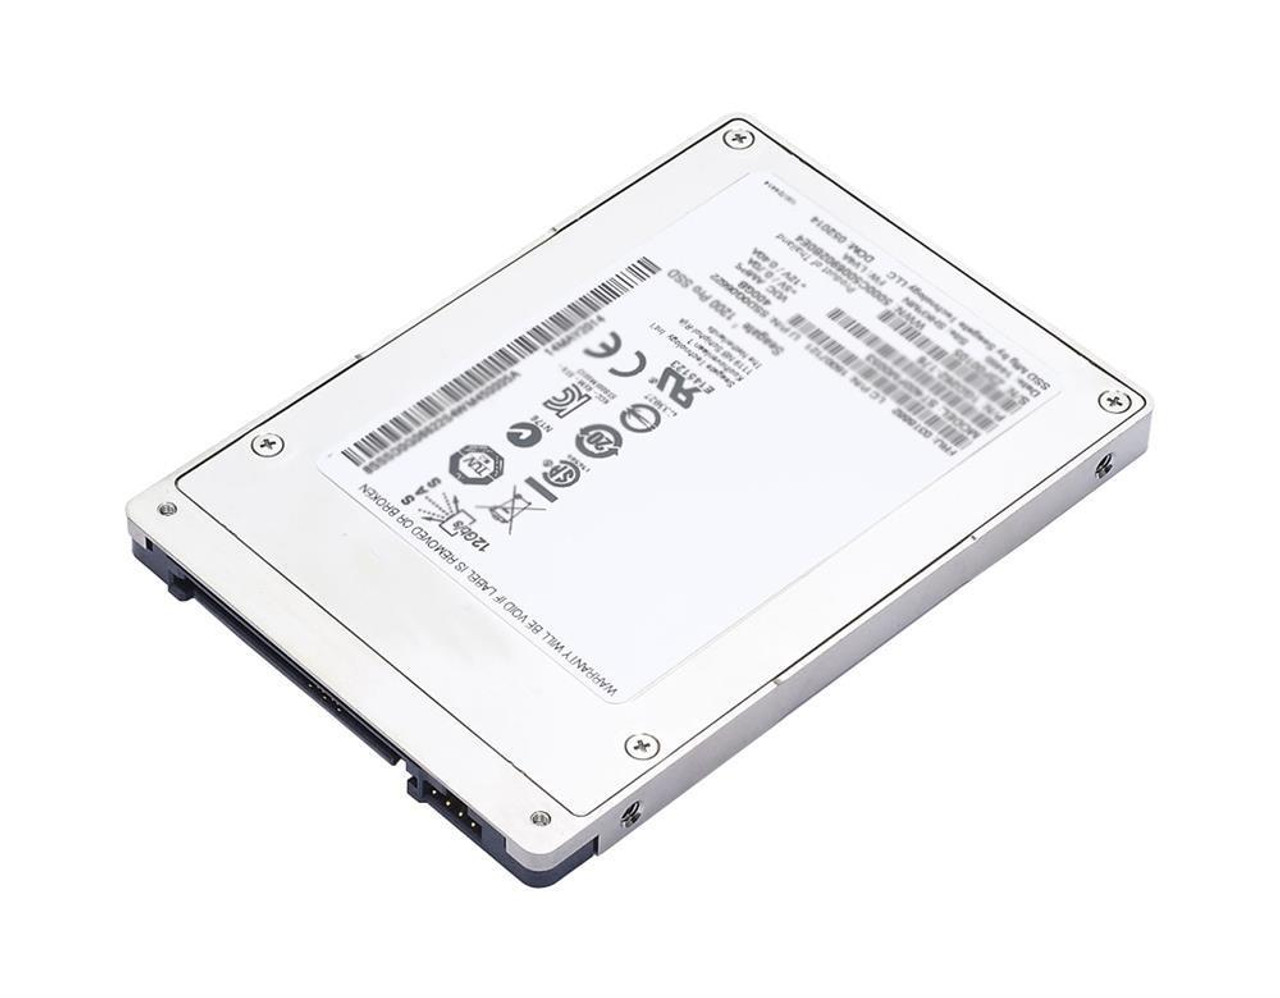 4XB0F28629-01 Lenovo 800GB eMLC SAS 12Gbps Hot Swap 2.5-inch Internal Solid State Drive (SSD) for ThinkServer